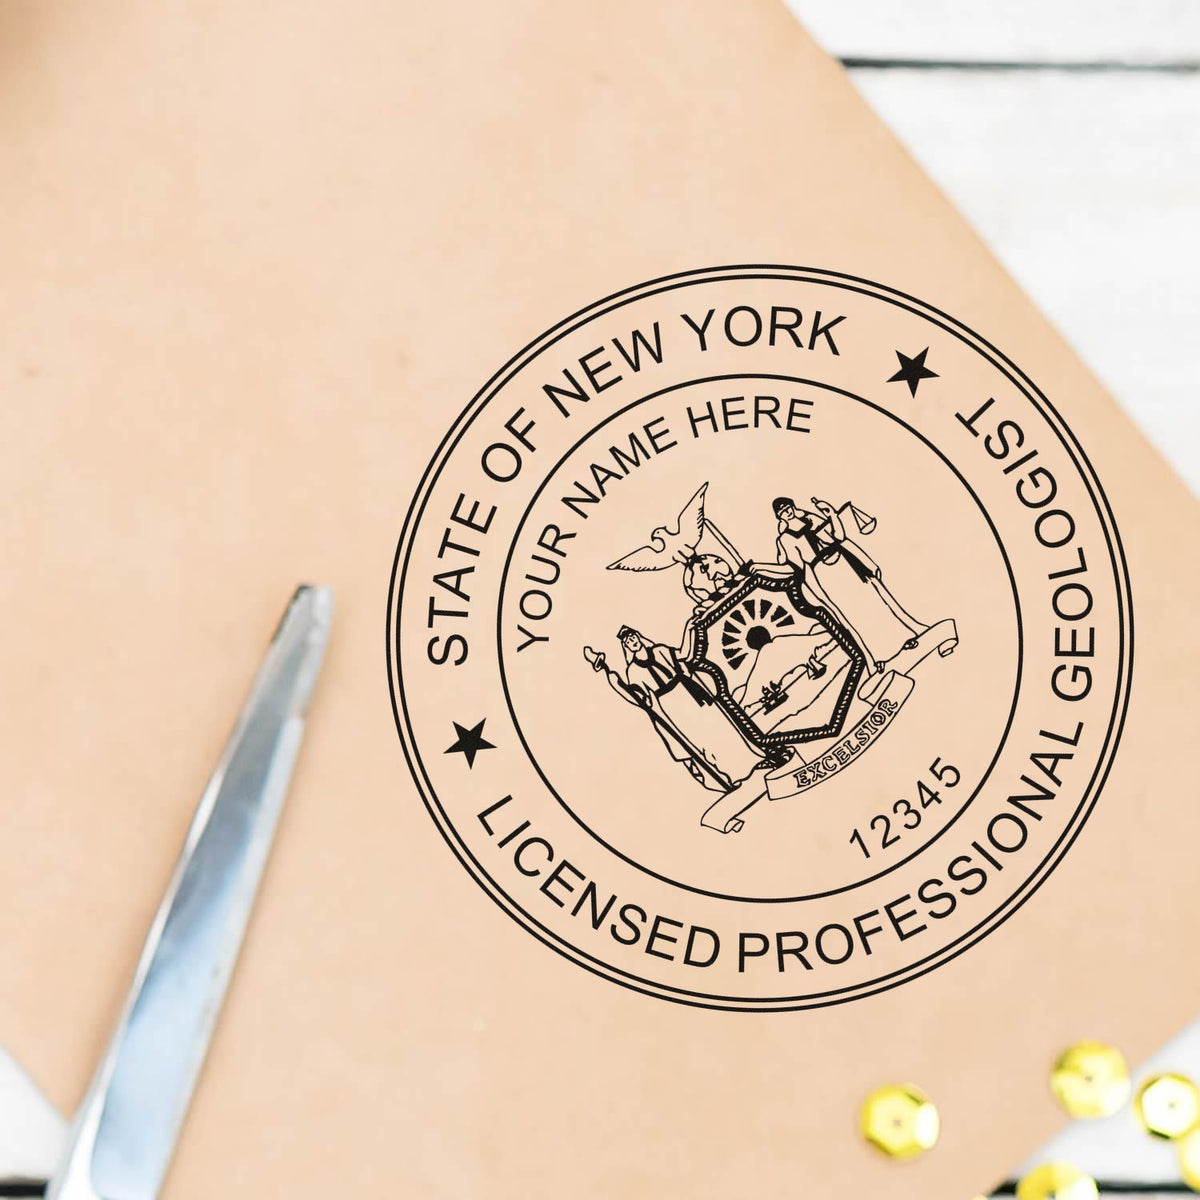 A photograph of the New York Professional Geologist Seal Stamp stamp impression reveals a vivid, professional image of the on paper.